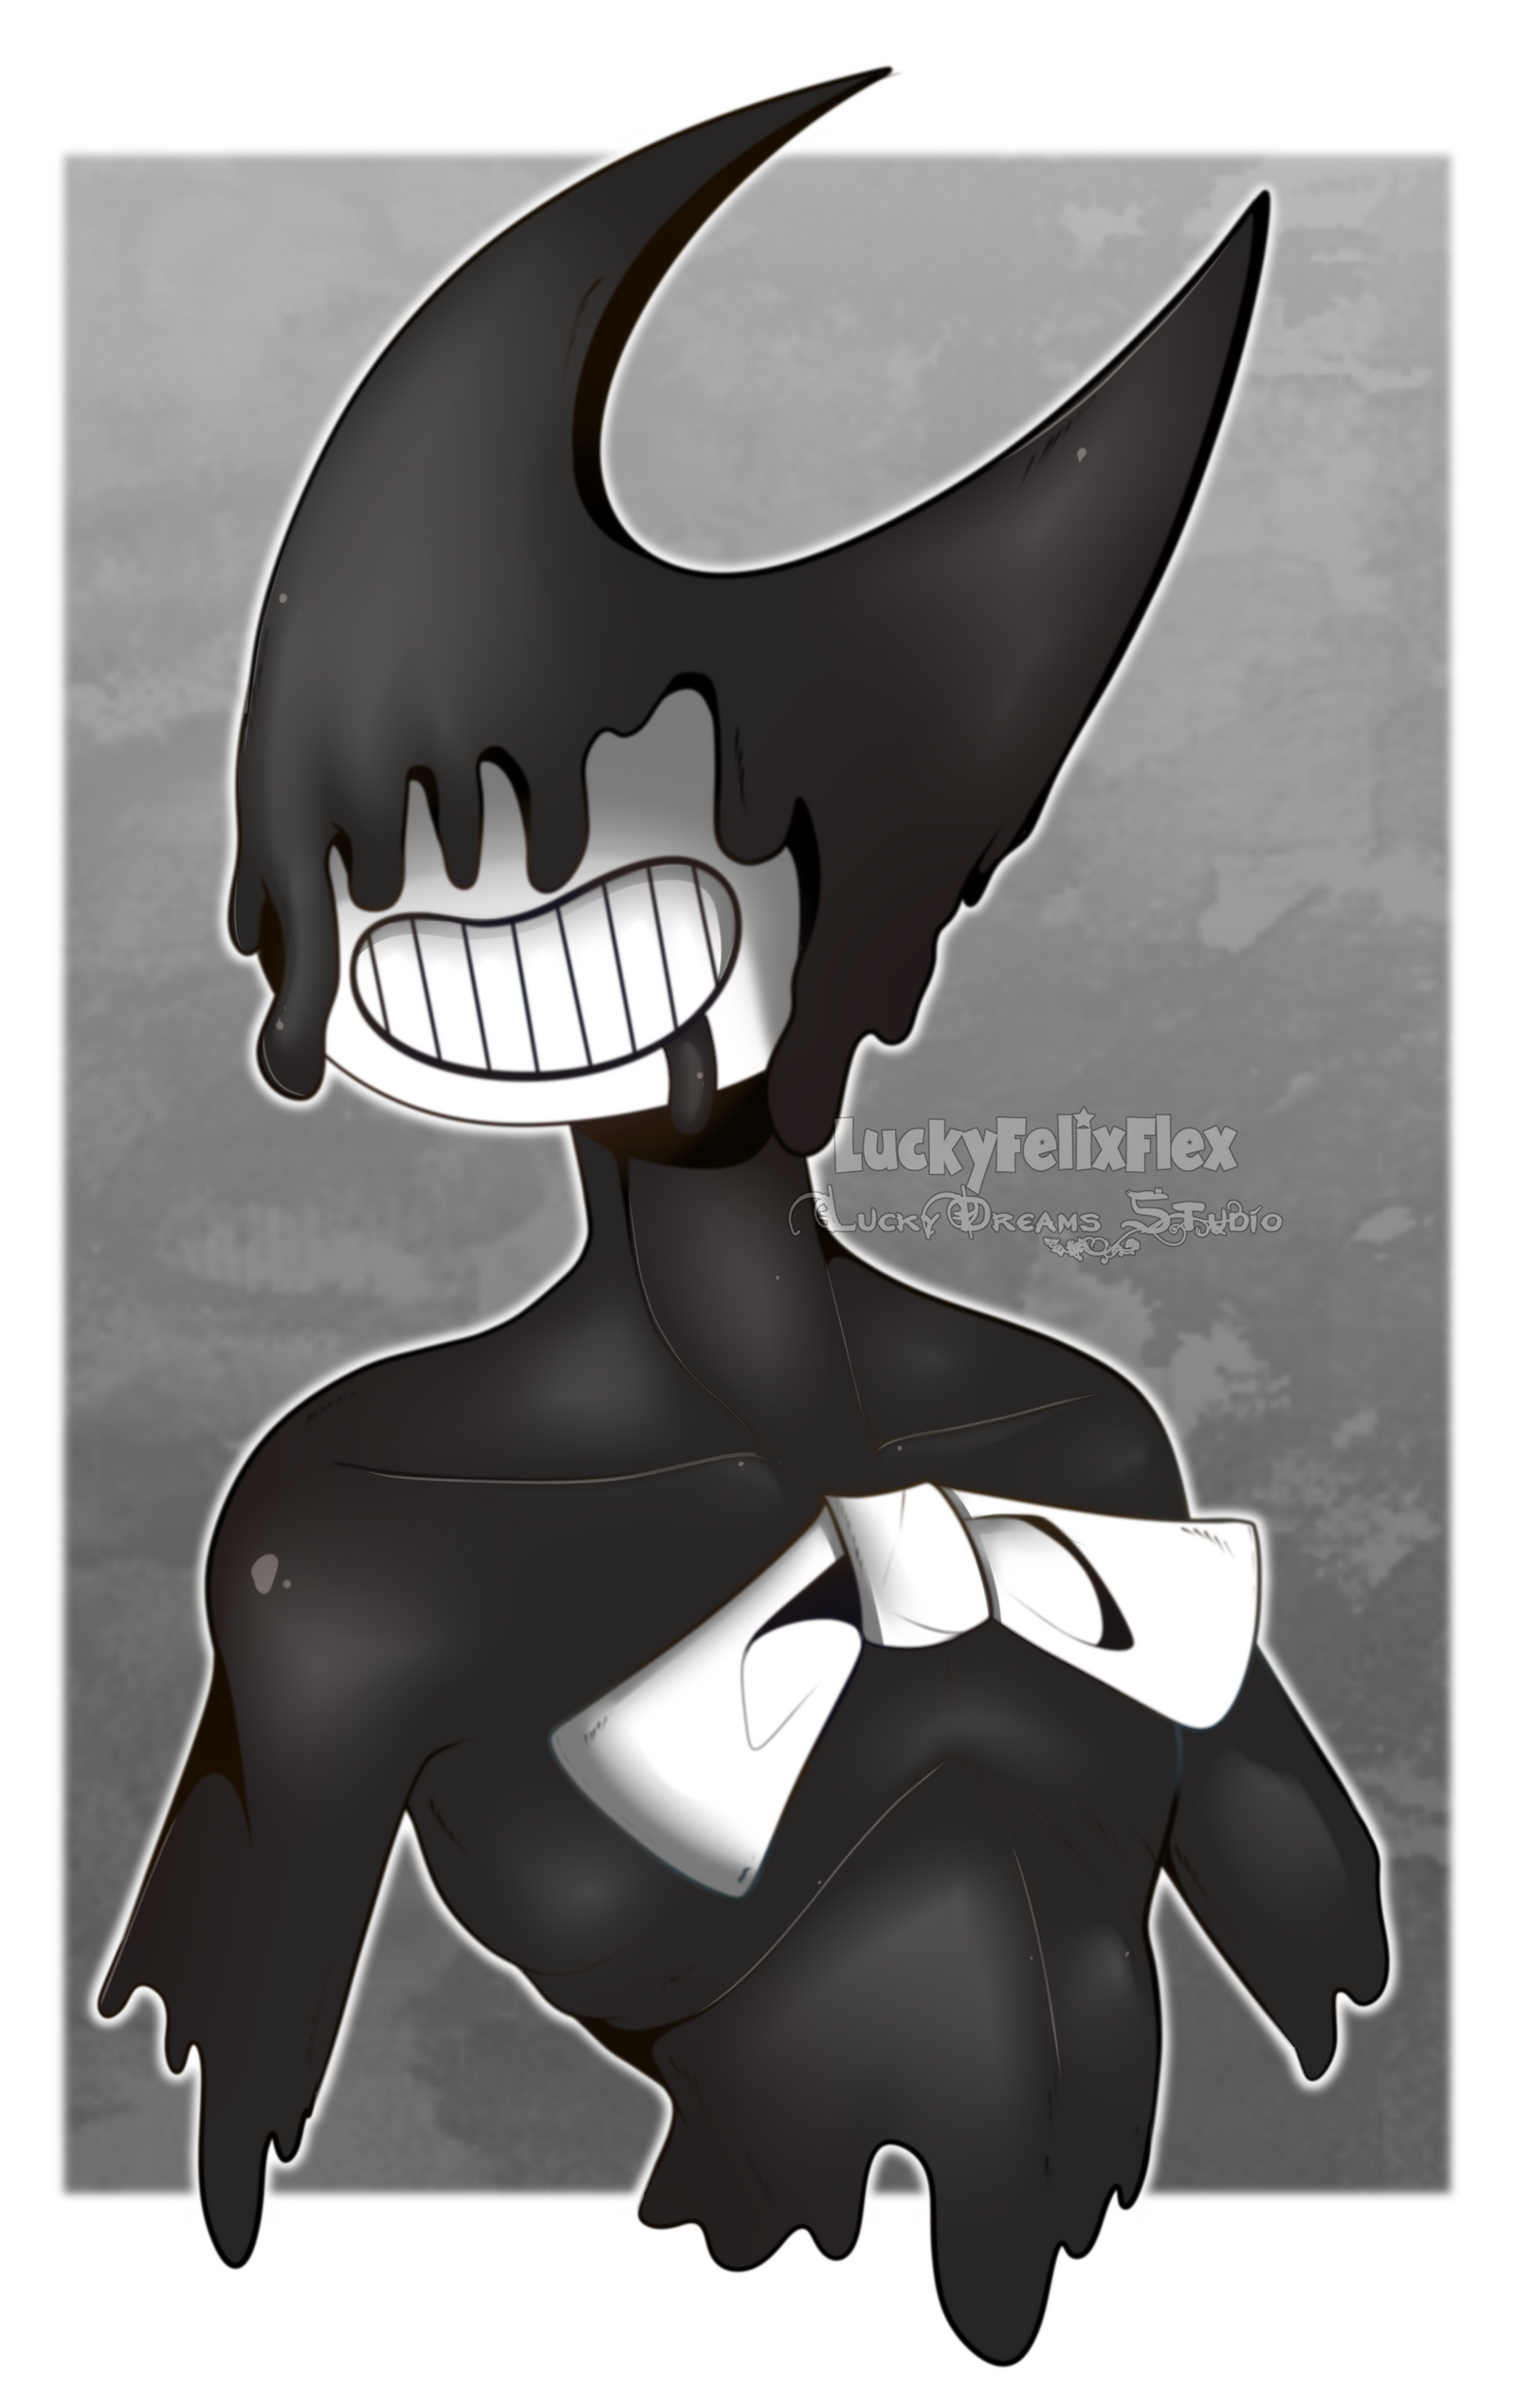 Bendy and the Ink Machine 2 by SoulKiller202 on DeviantArt